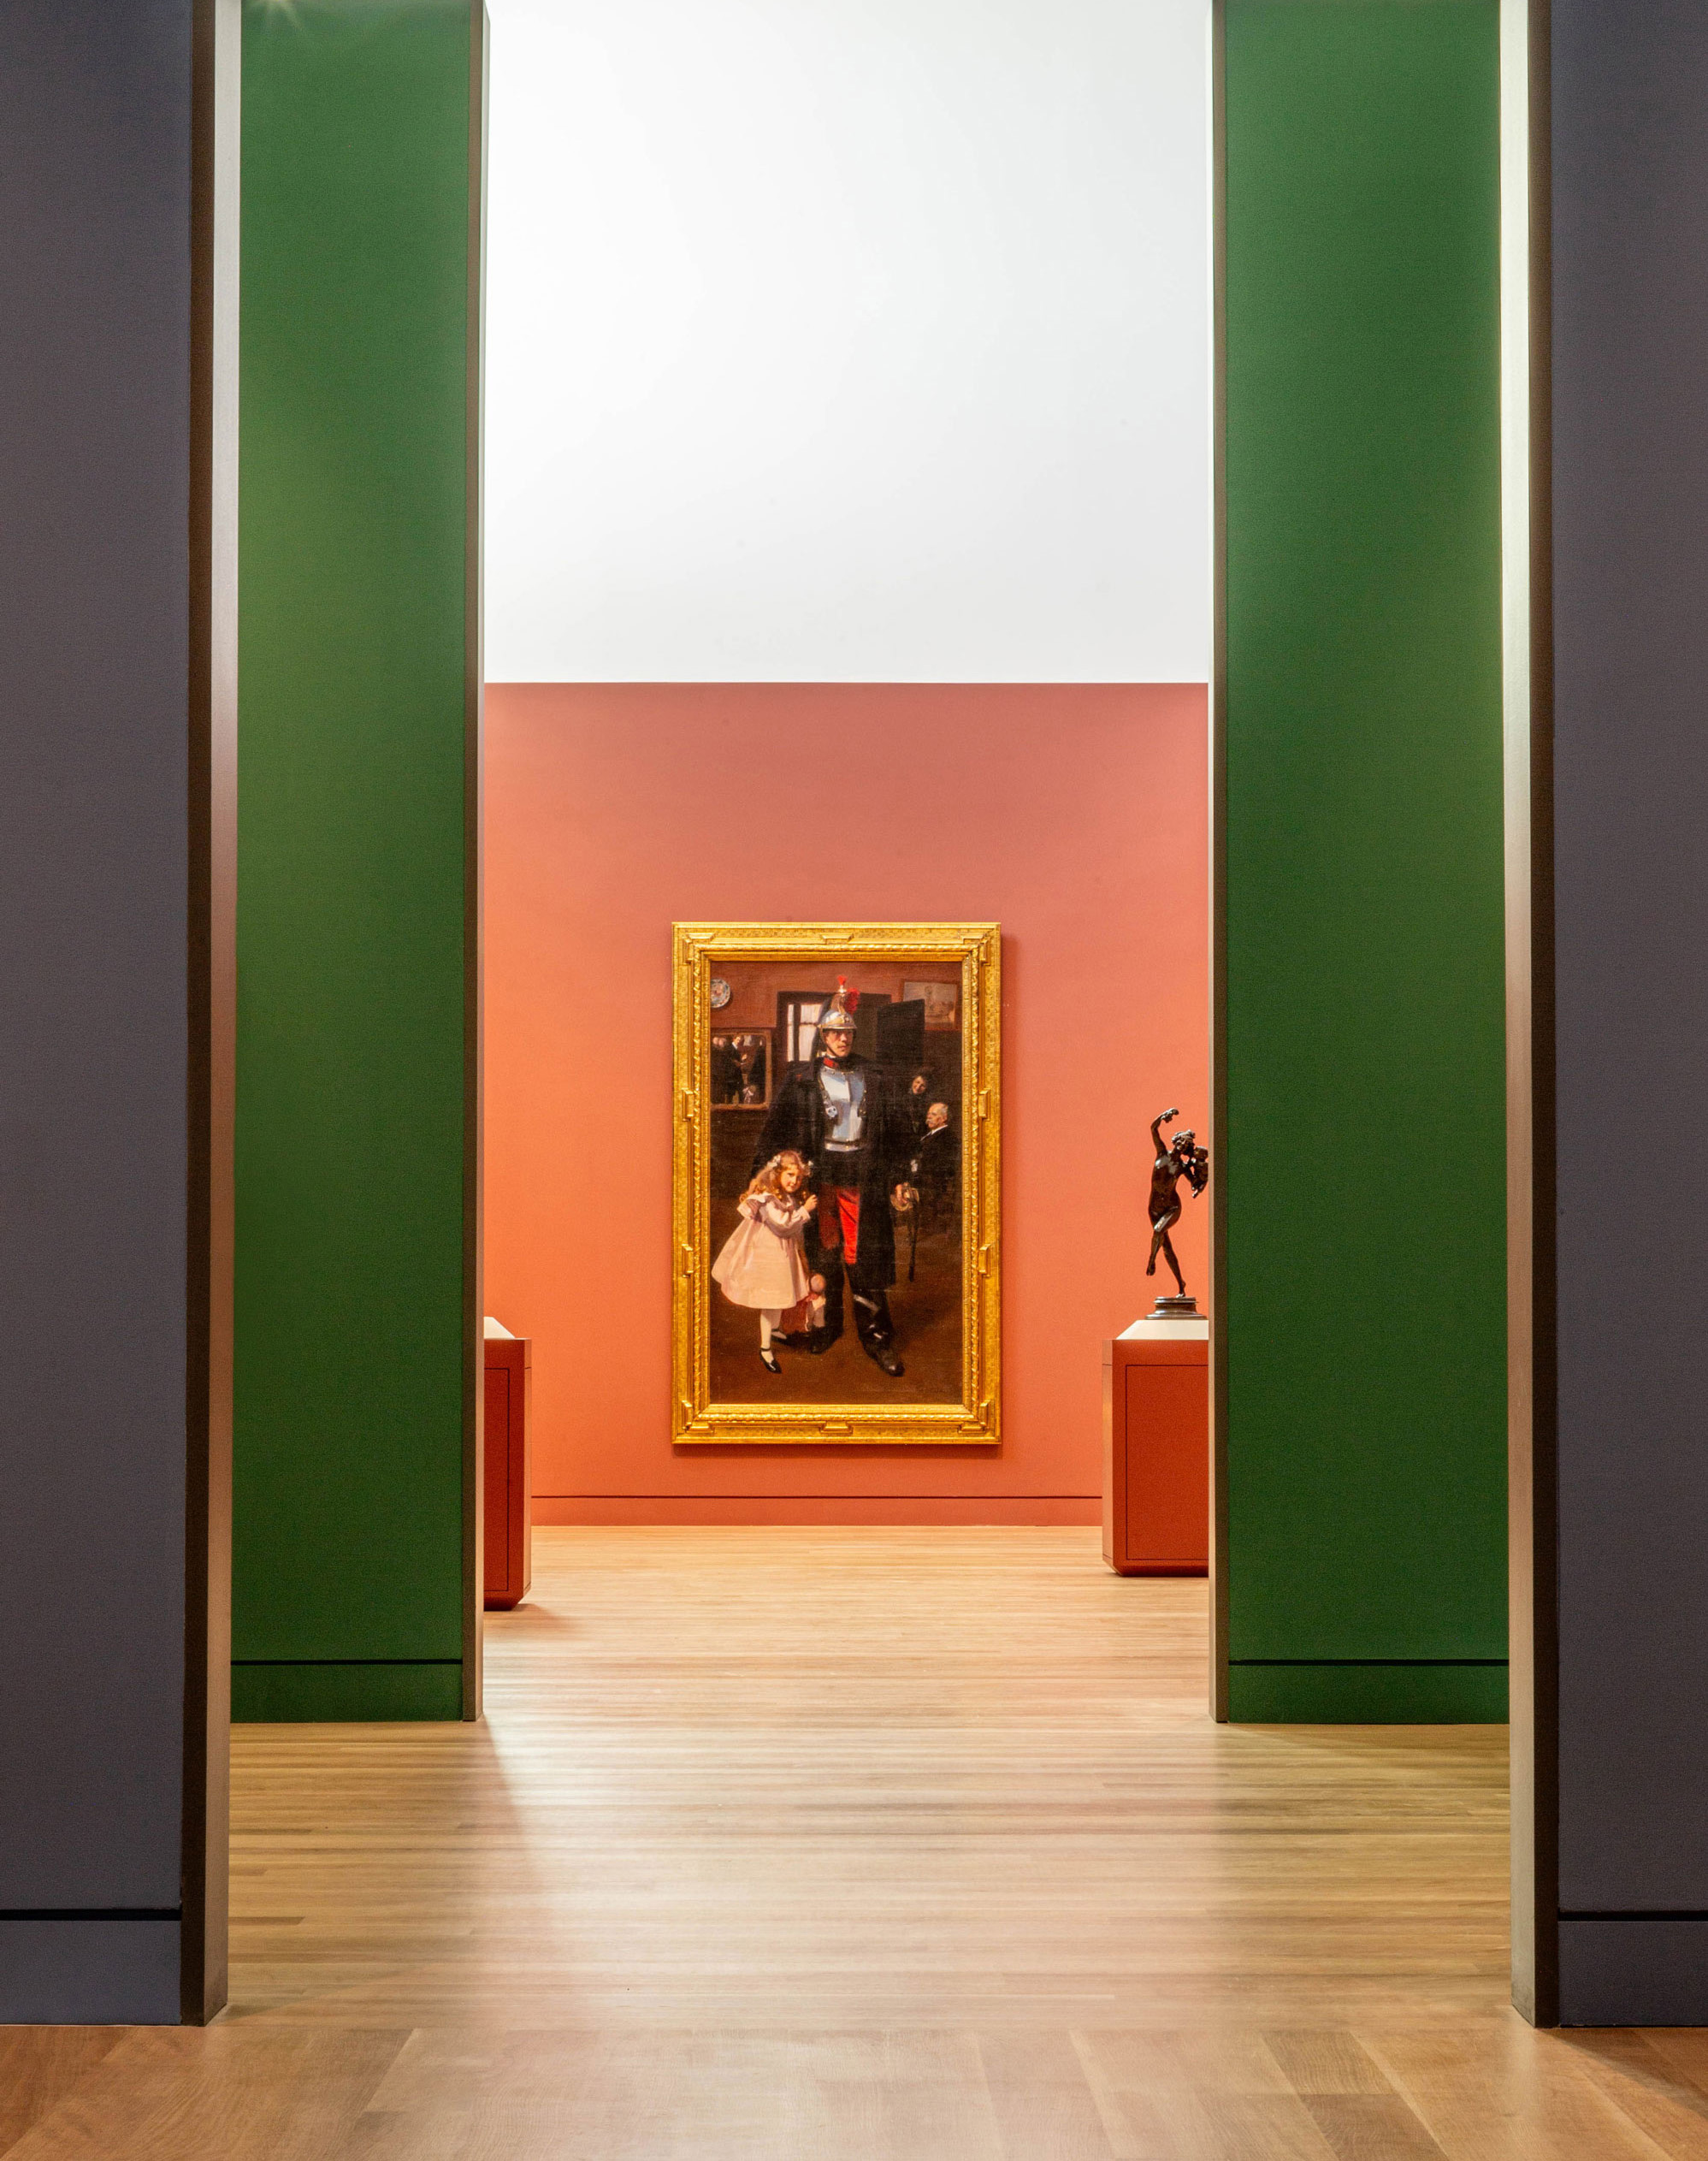 interior of Palmer framed by doorway between rooms and one large painting on the wall, photo by Nick Sloff '92 A&A